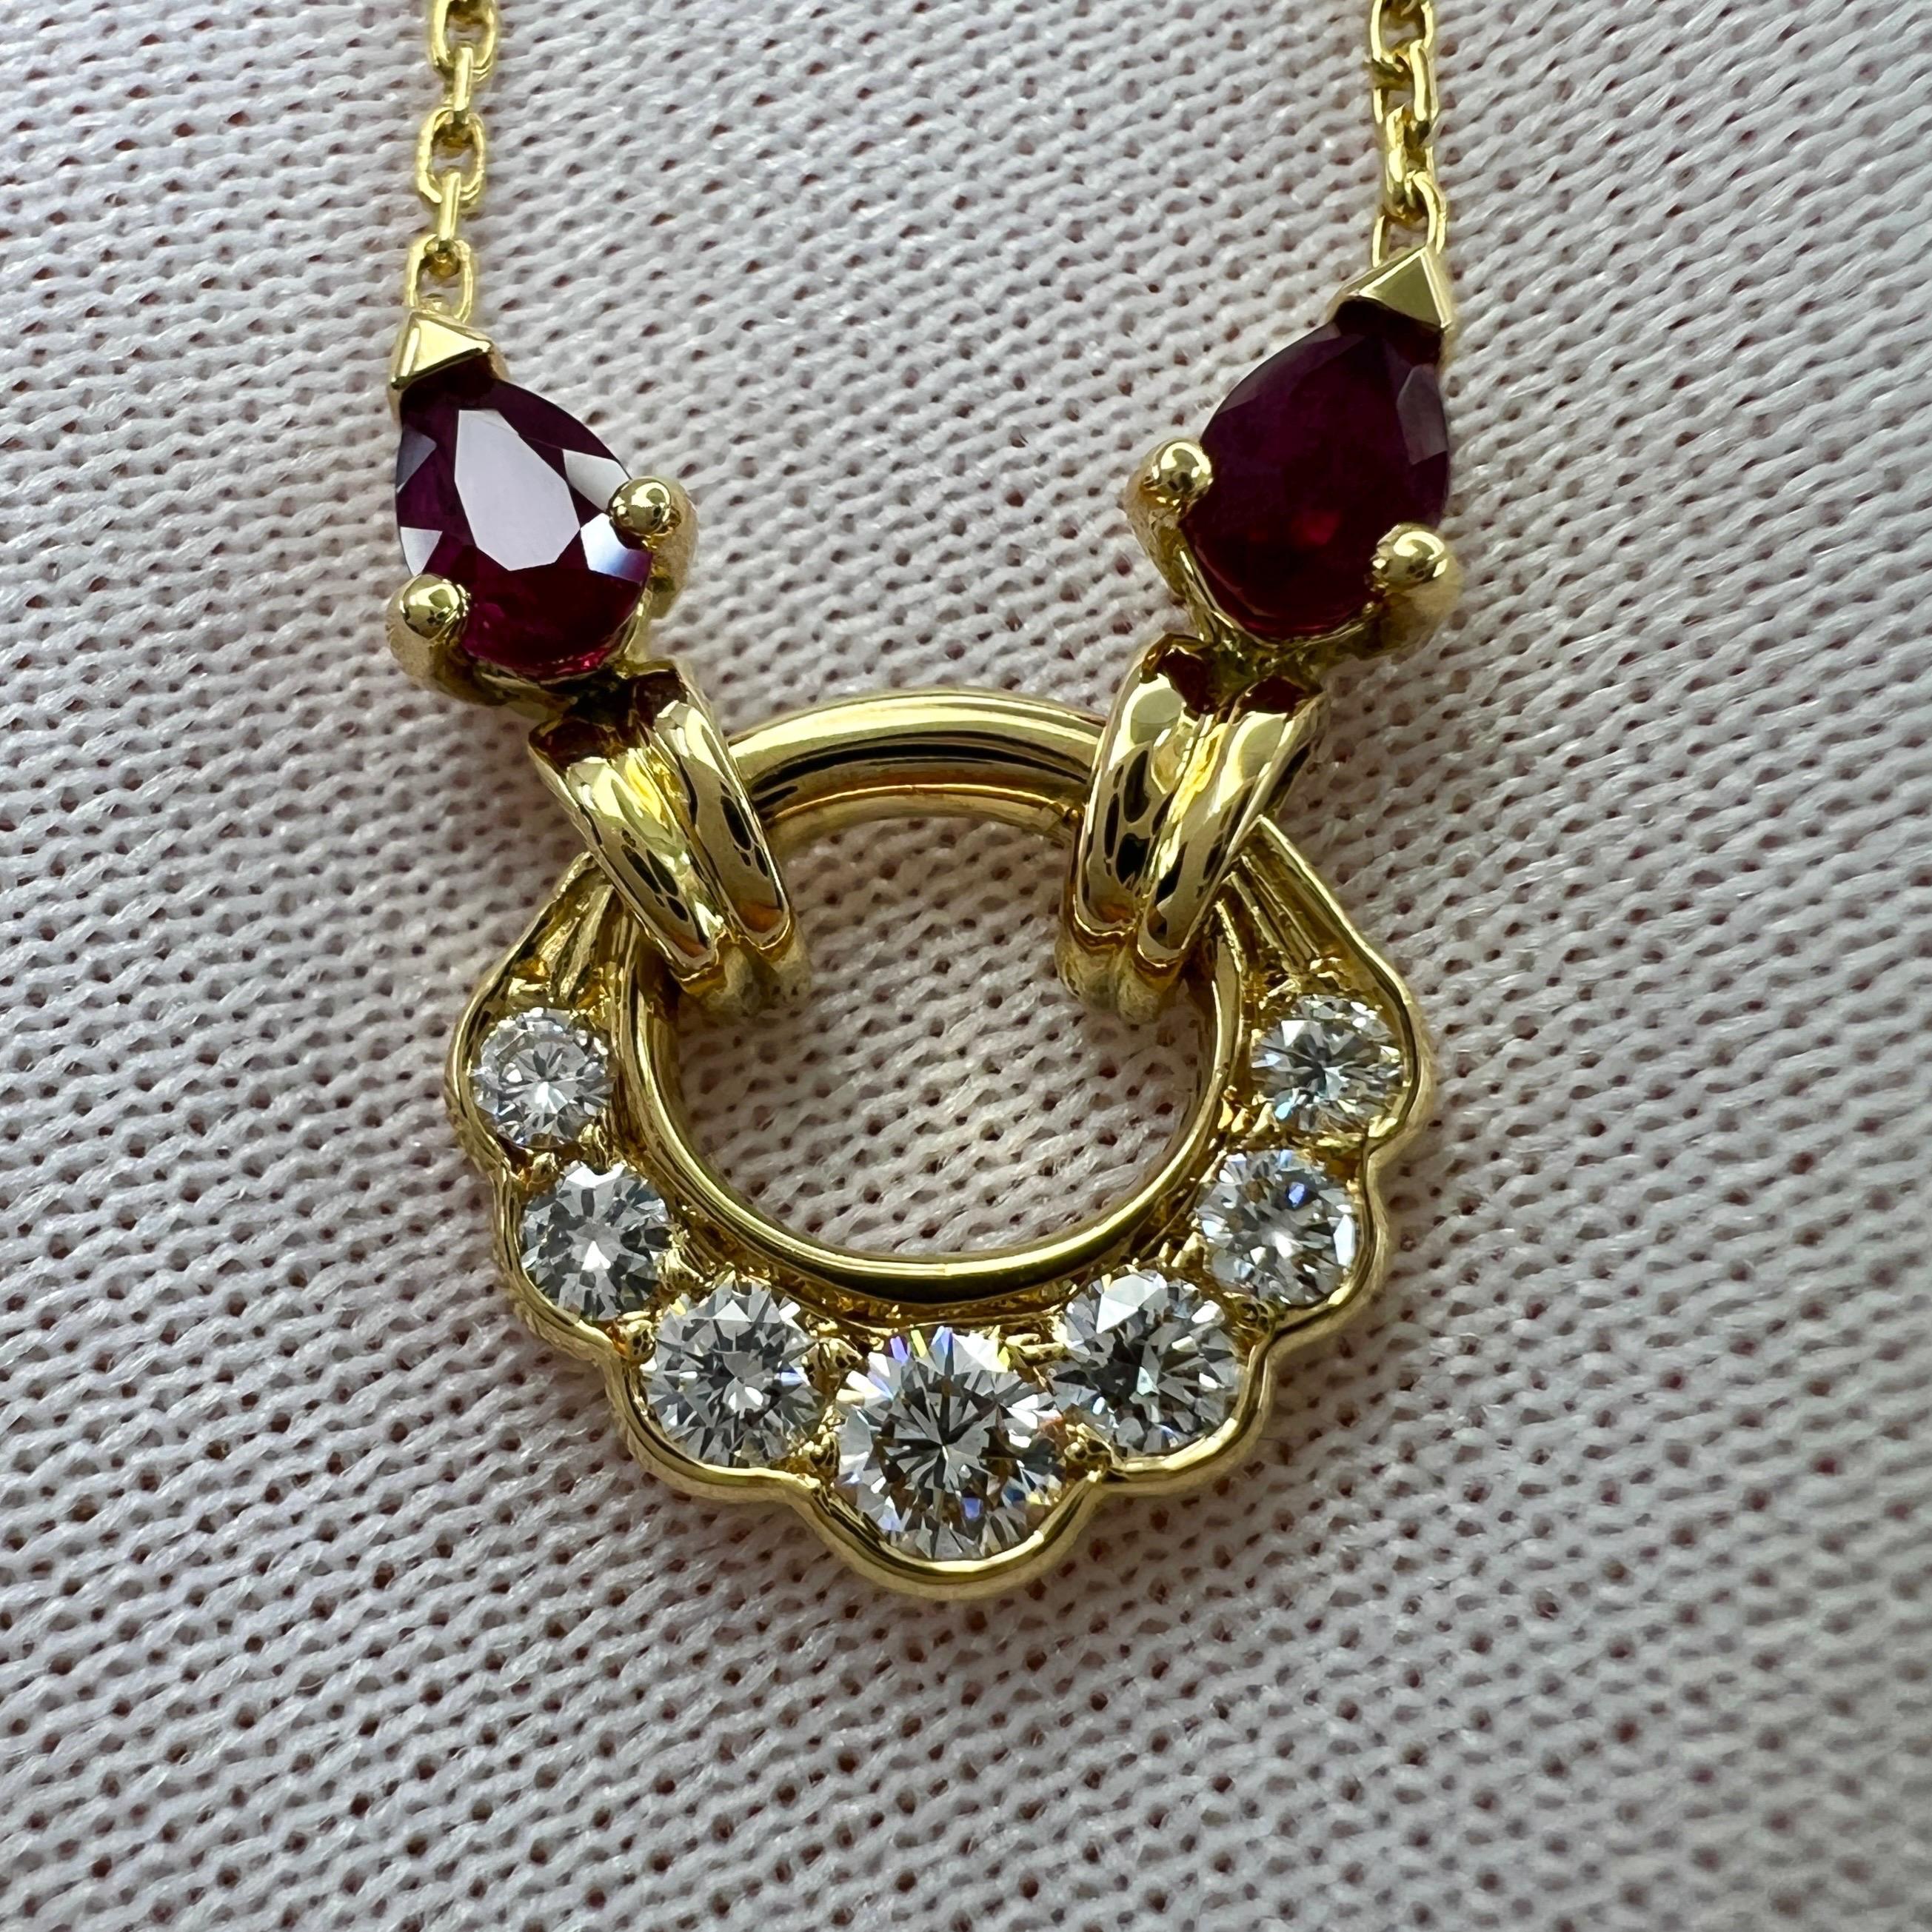 Vintage Van Cleef & Arpels Red Ruby And Diamond 18k Yellow Gold Pendant Necklace.

A beautiful vintage pendant necklace by Van Cleef & Arpels with a stunning pair of deep red pear cut rubies measuring 5x4mm and seven graduating colourless diamonds